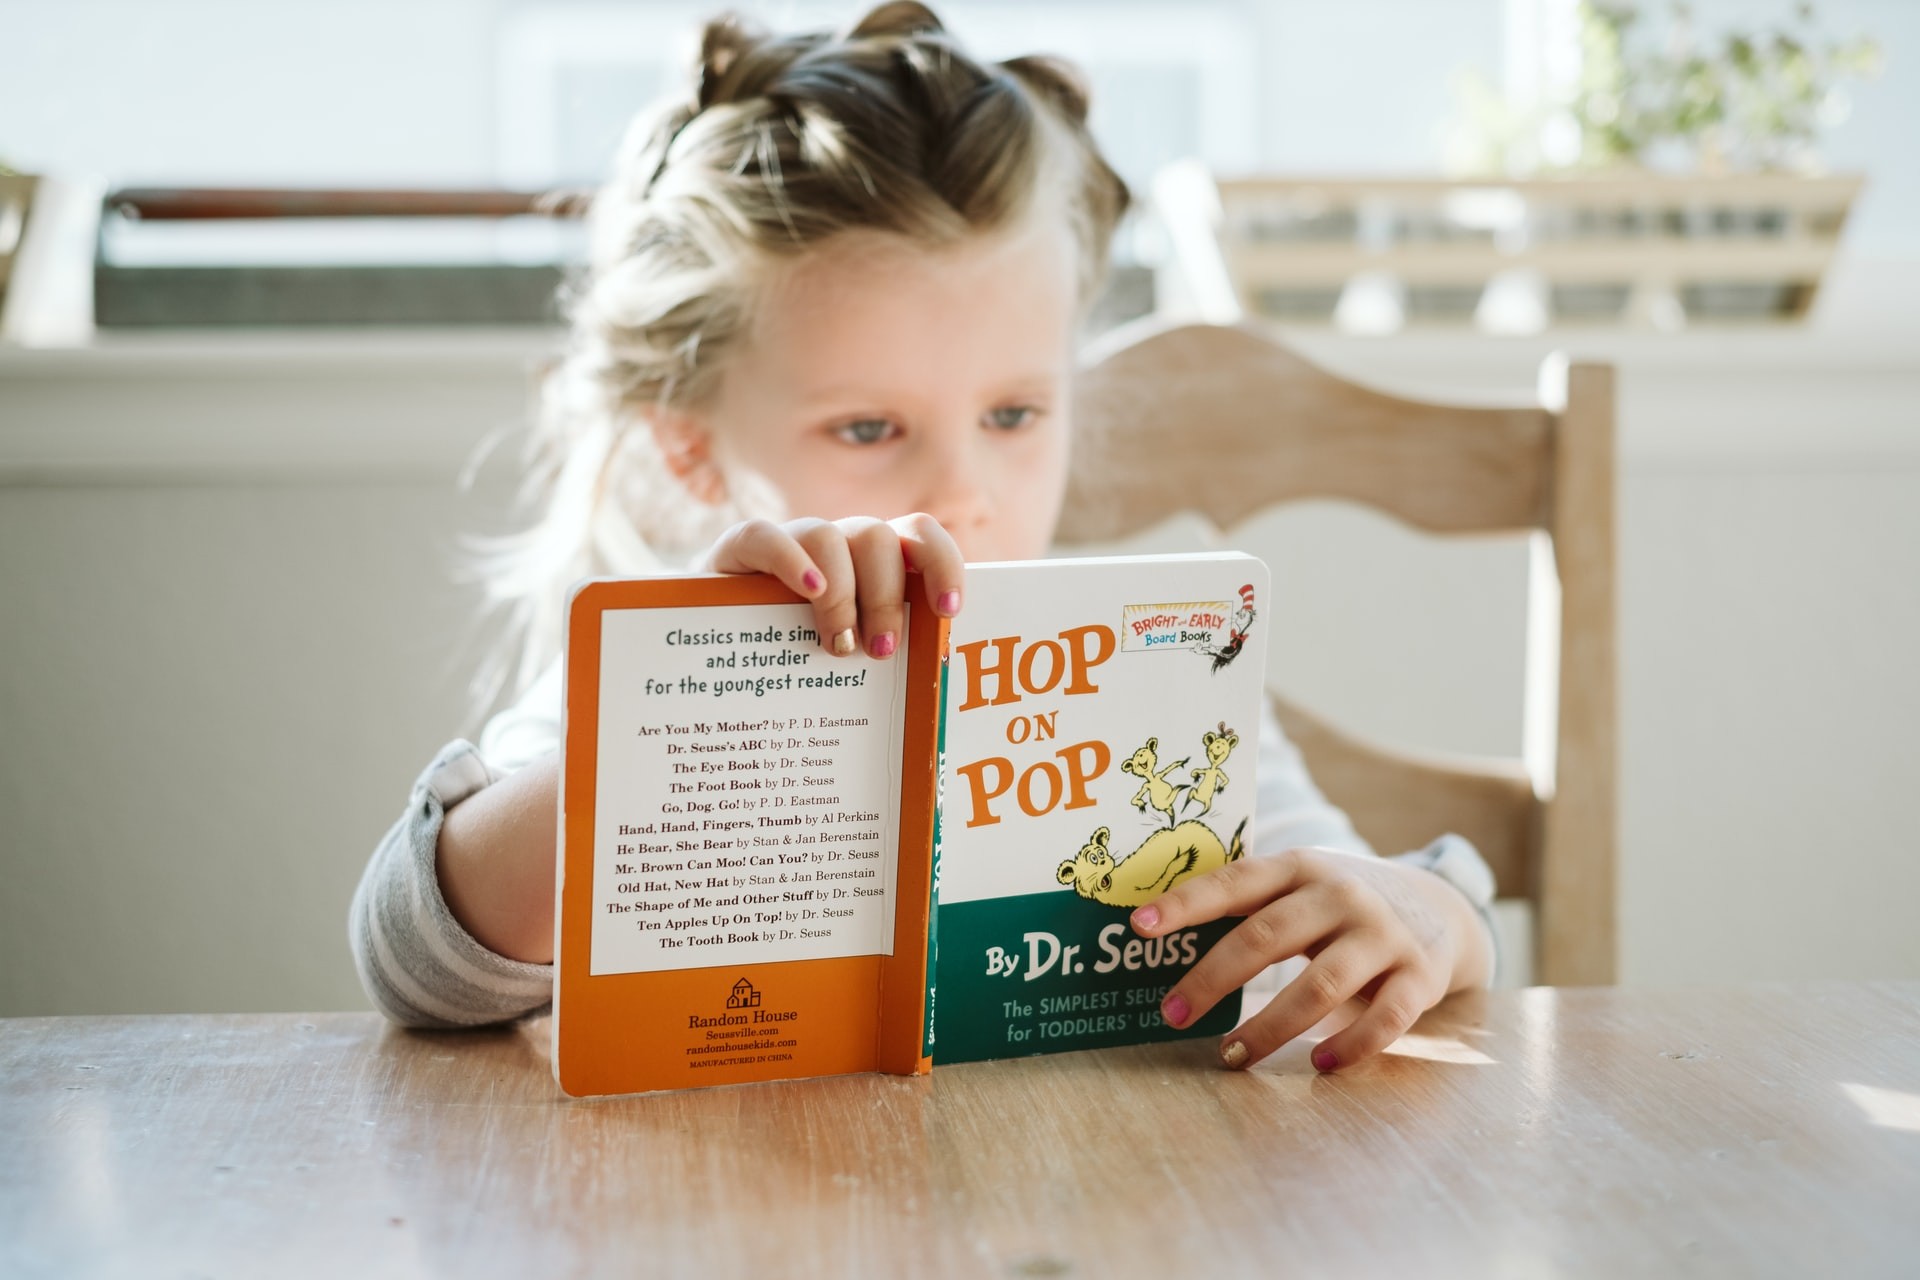 Young girl reads "Hop on Pop" during reading strategies in the classroom.